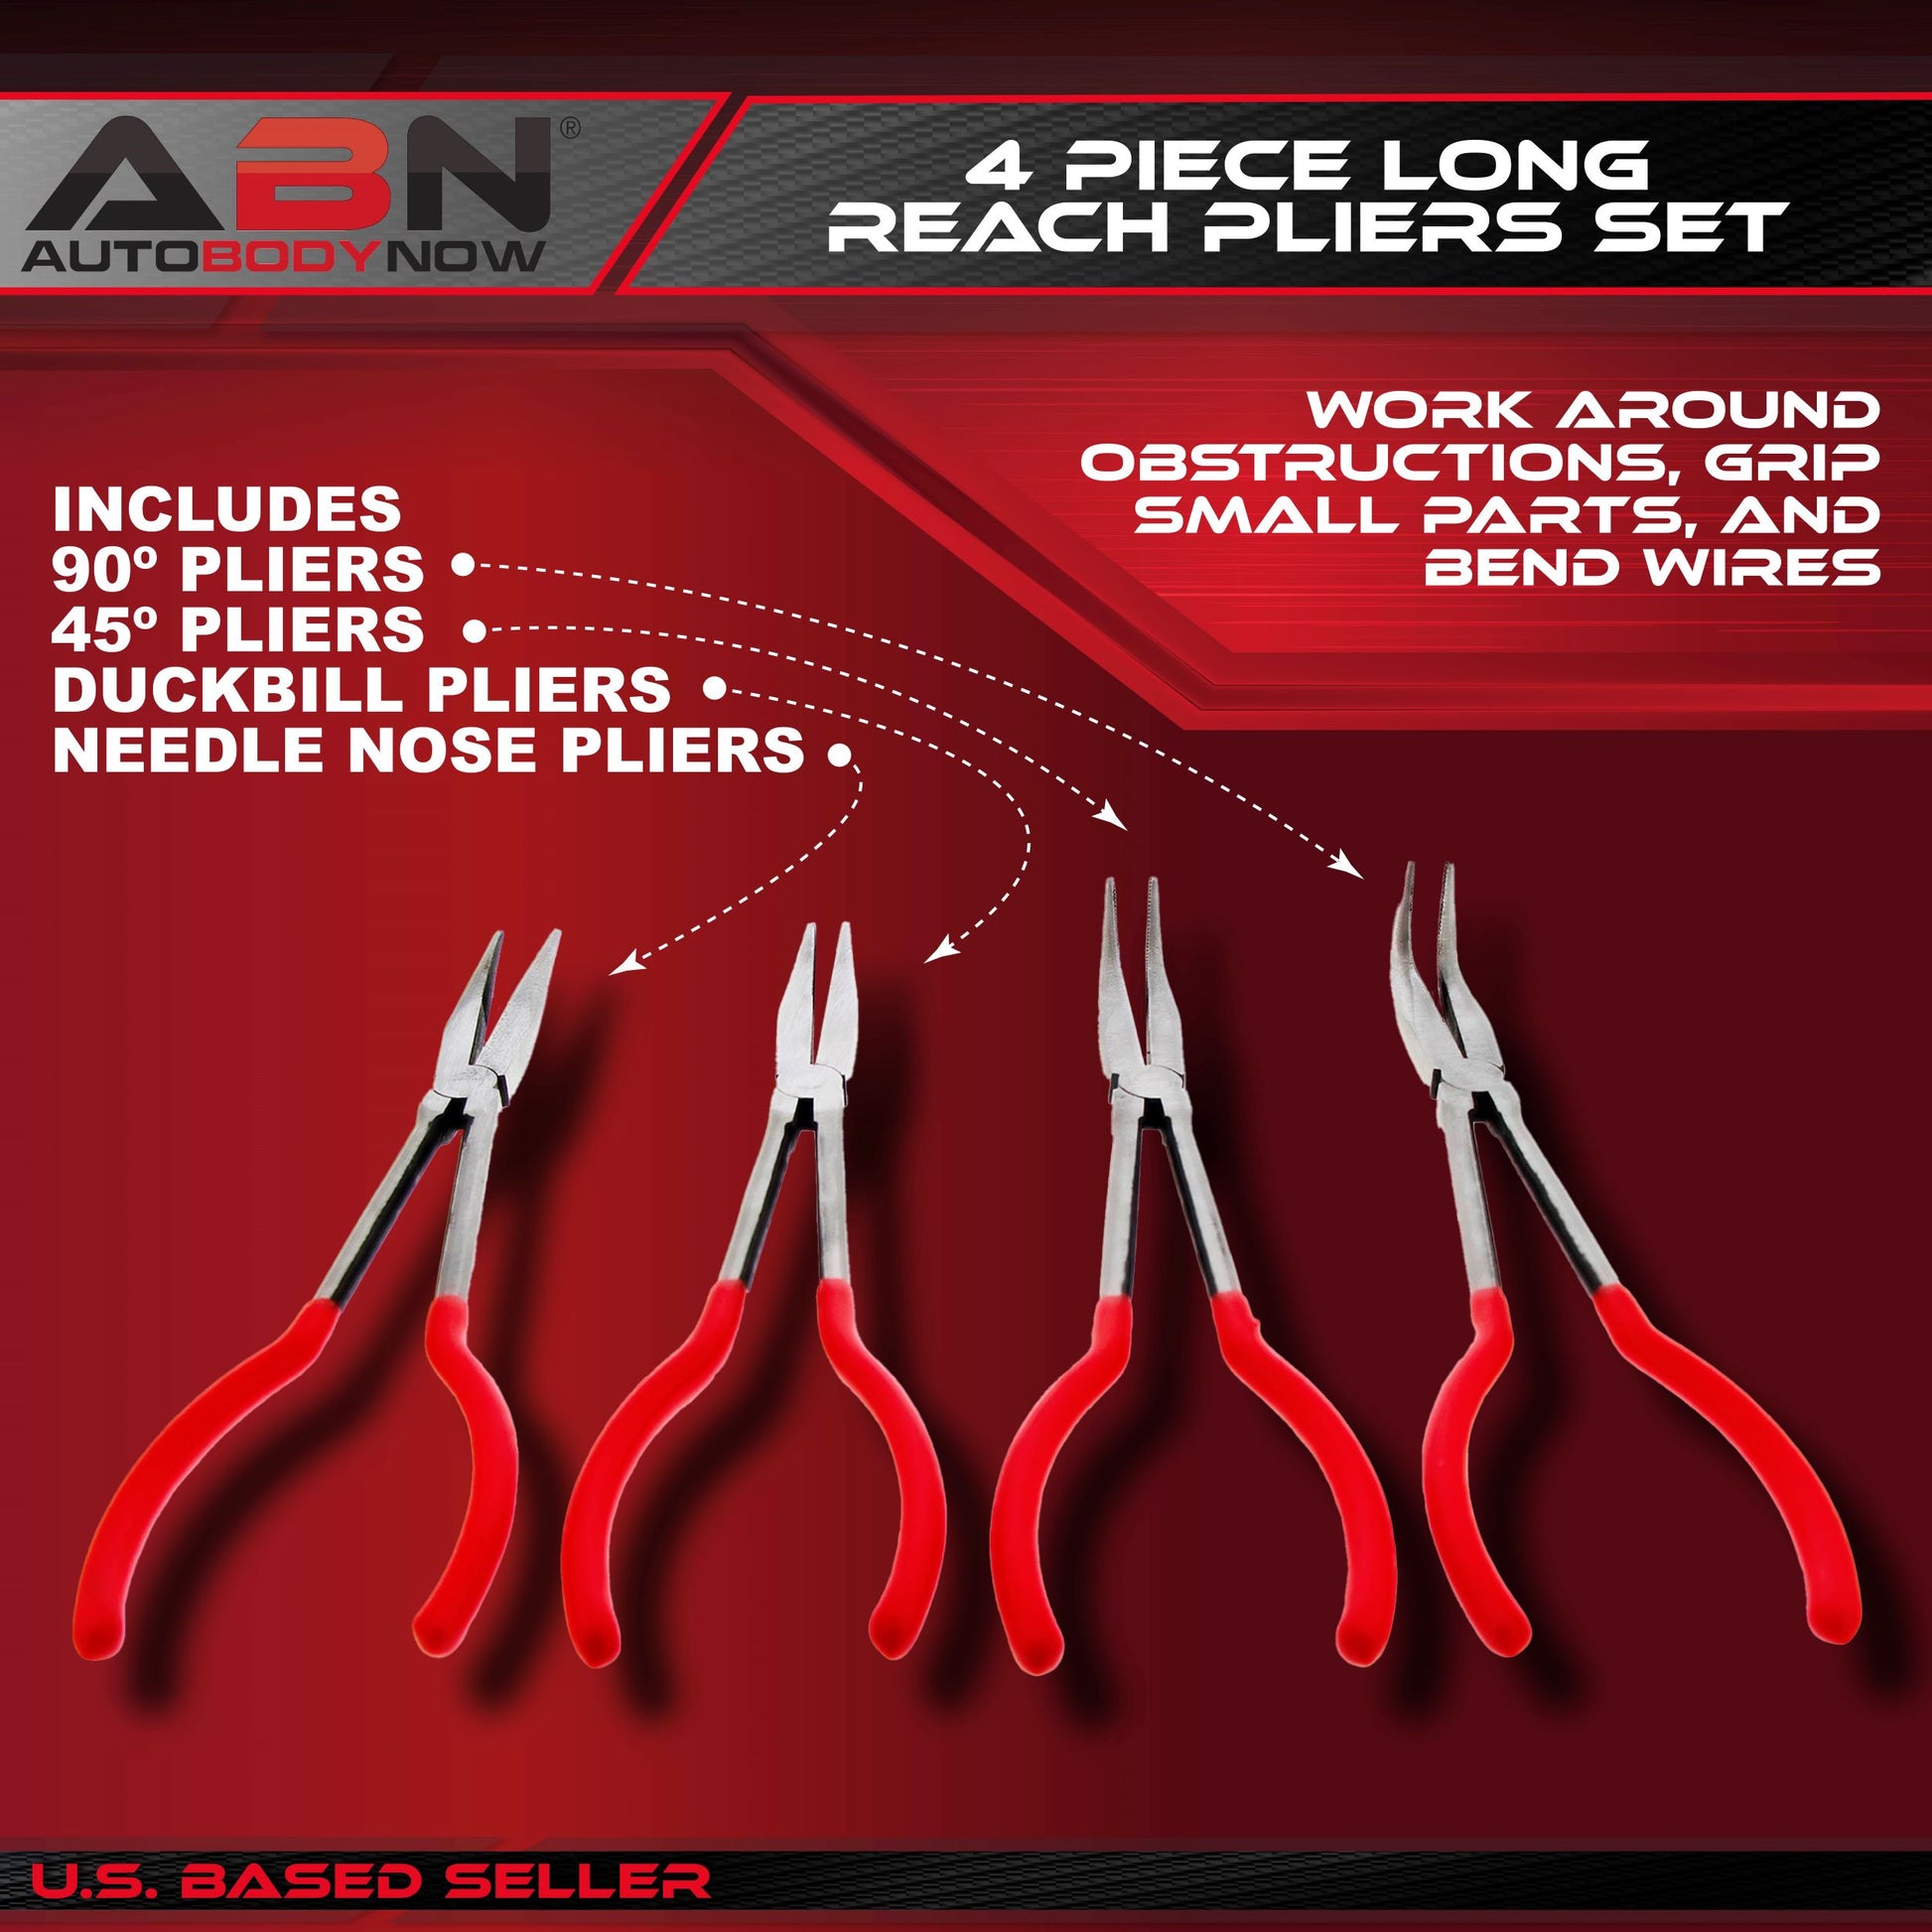 Long Reach Pliers for Narrow Spaces and Limited Clearance Areas ABN 73 –